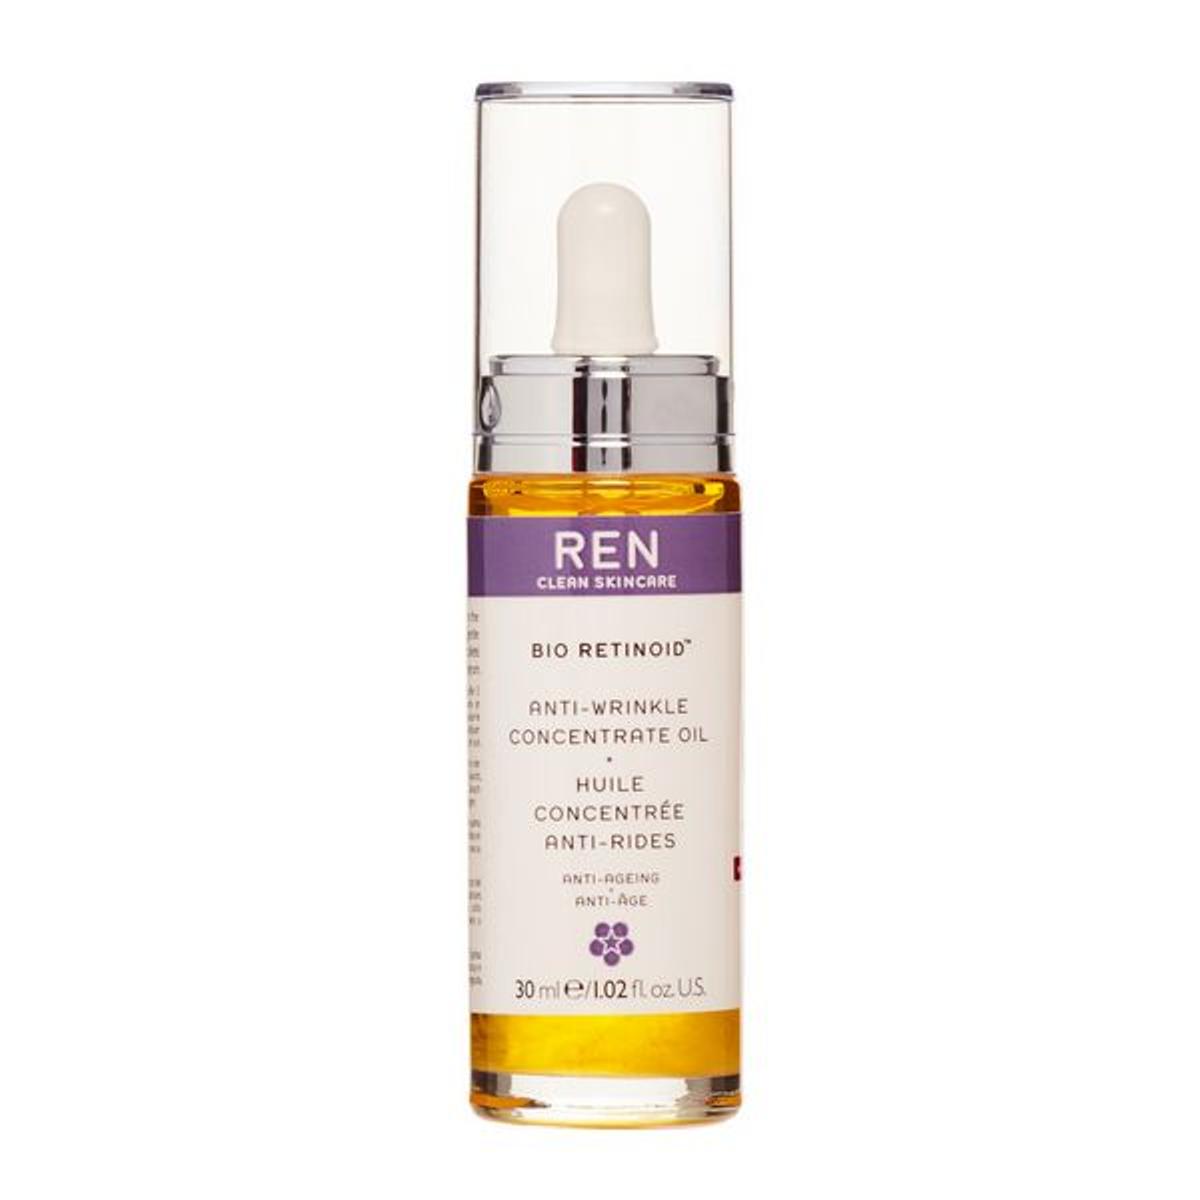 Anti-wrinkle concentrate oil, Ren